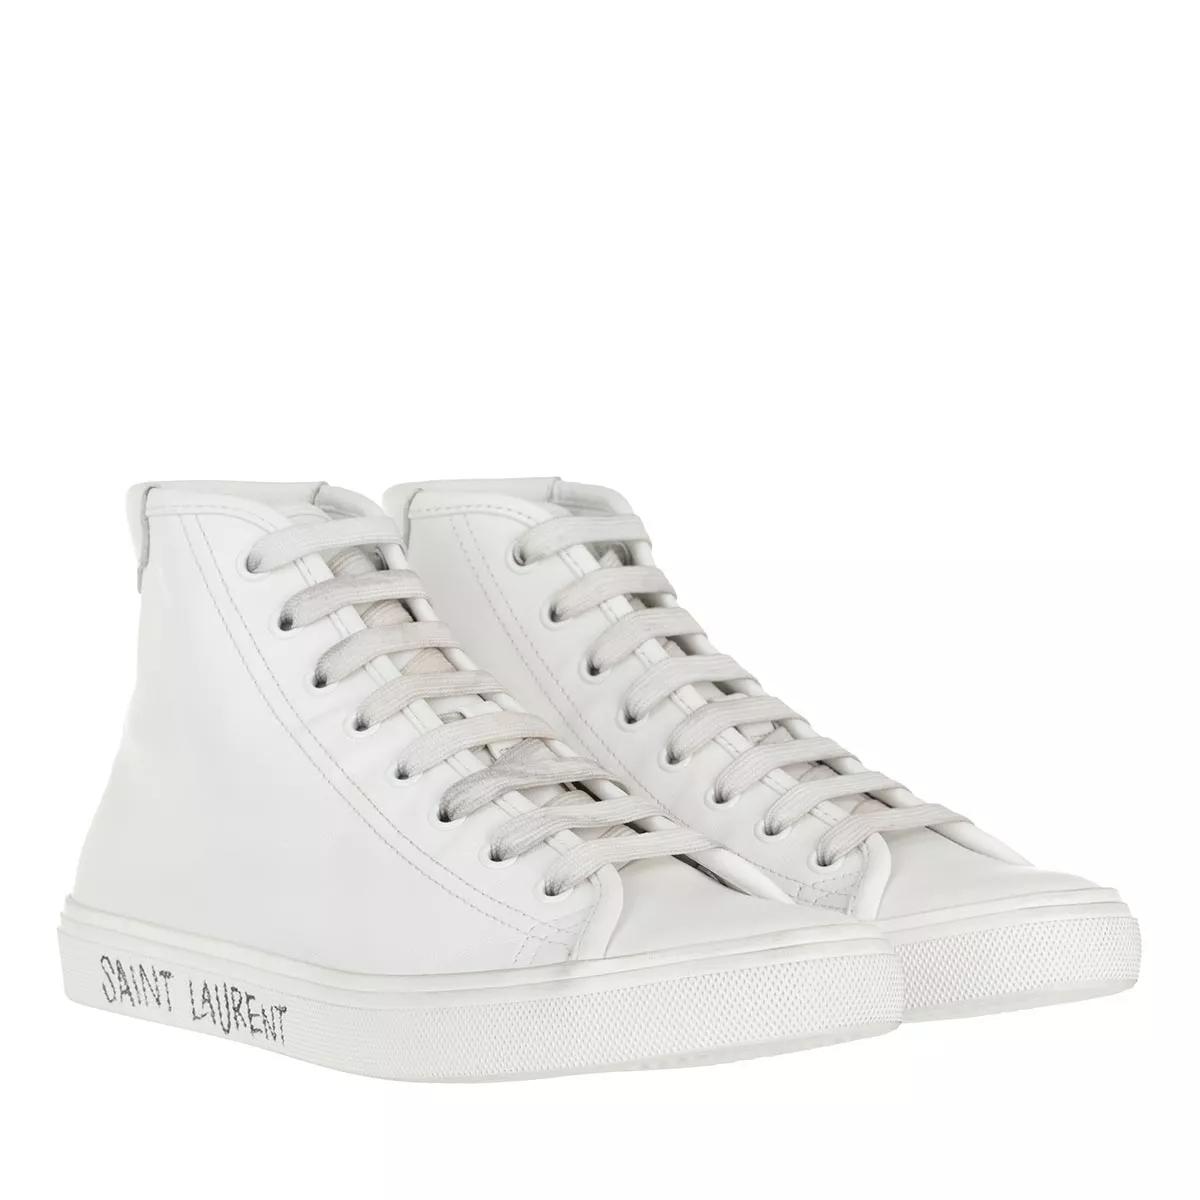 Malibu Mid Top Sneakers Smooth Leather White High-Top Sneaker